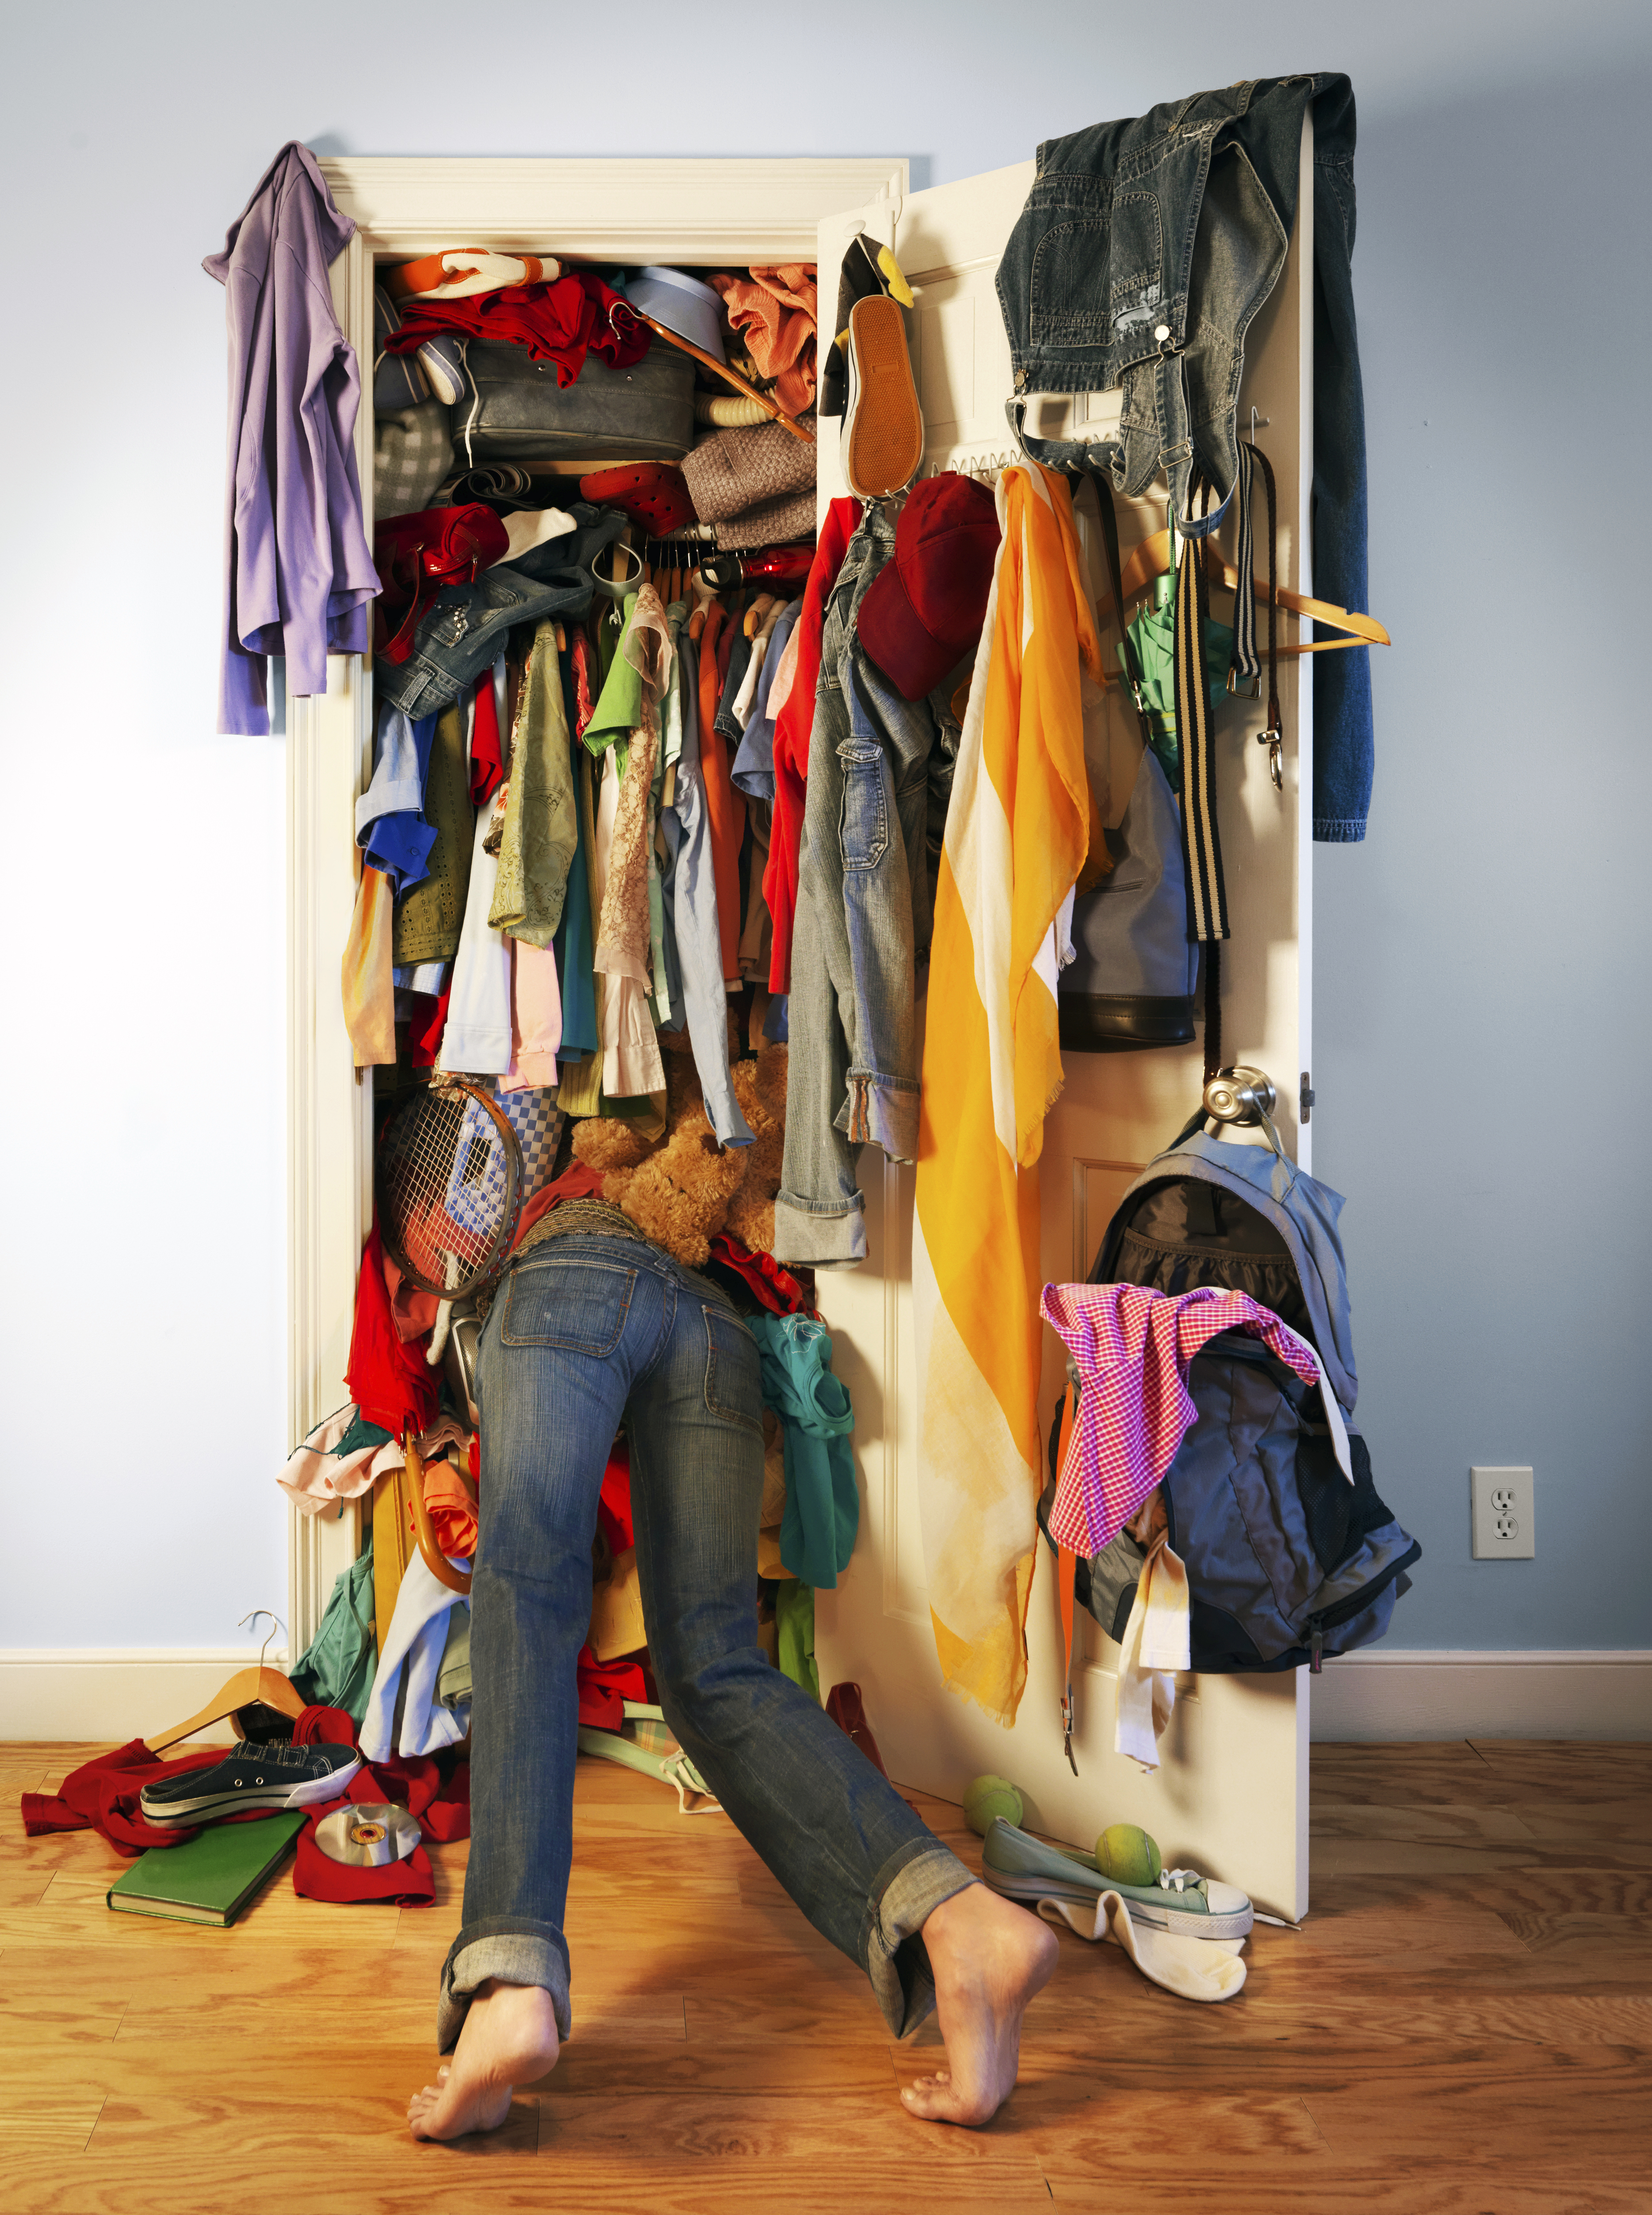 12 Ways to Stop Wasting Money and Take Control of Your Stuff